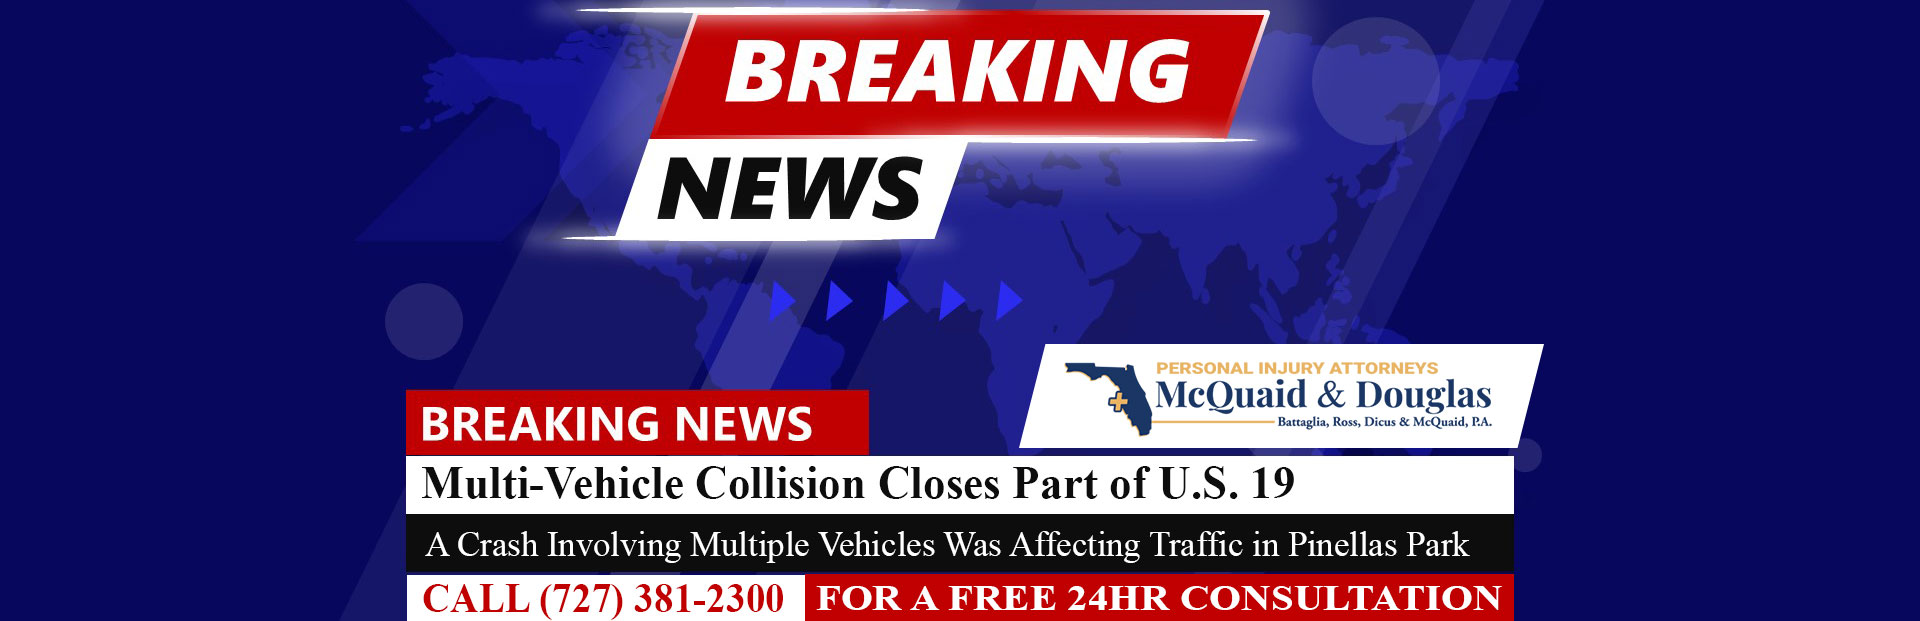 [9-8-22] Multi-Vehicle Collision Closes Part of U.S. 19 in Pinellas Park